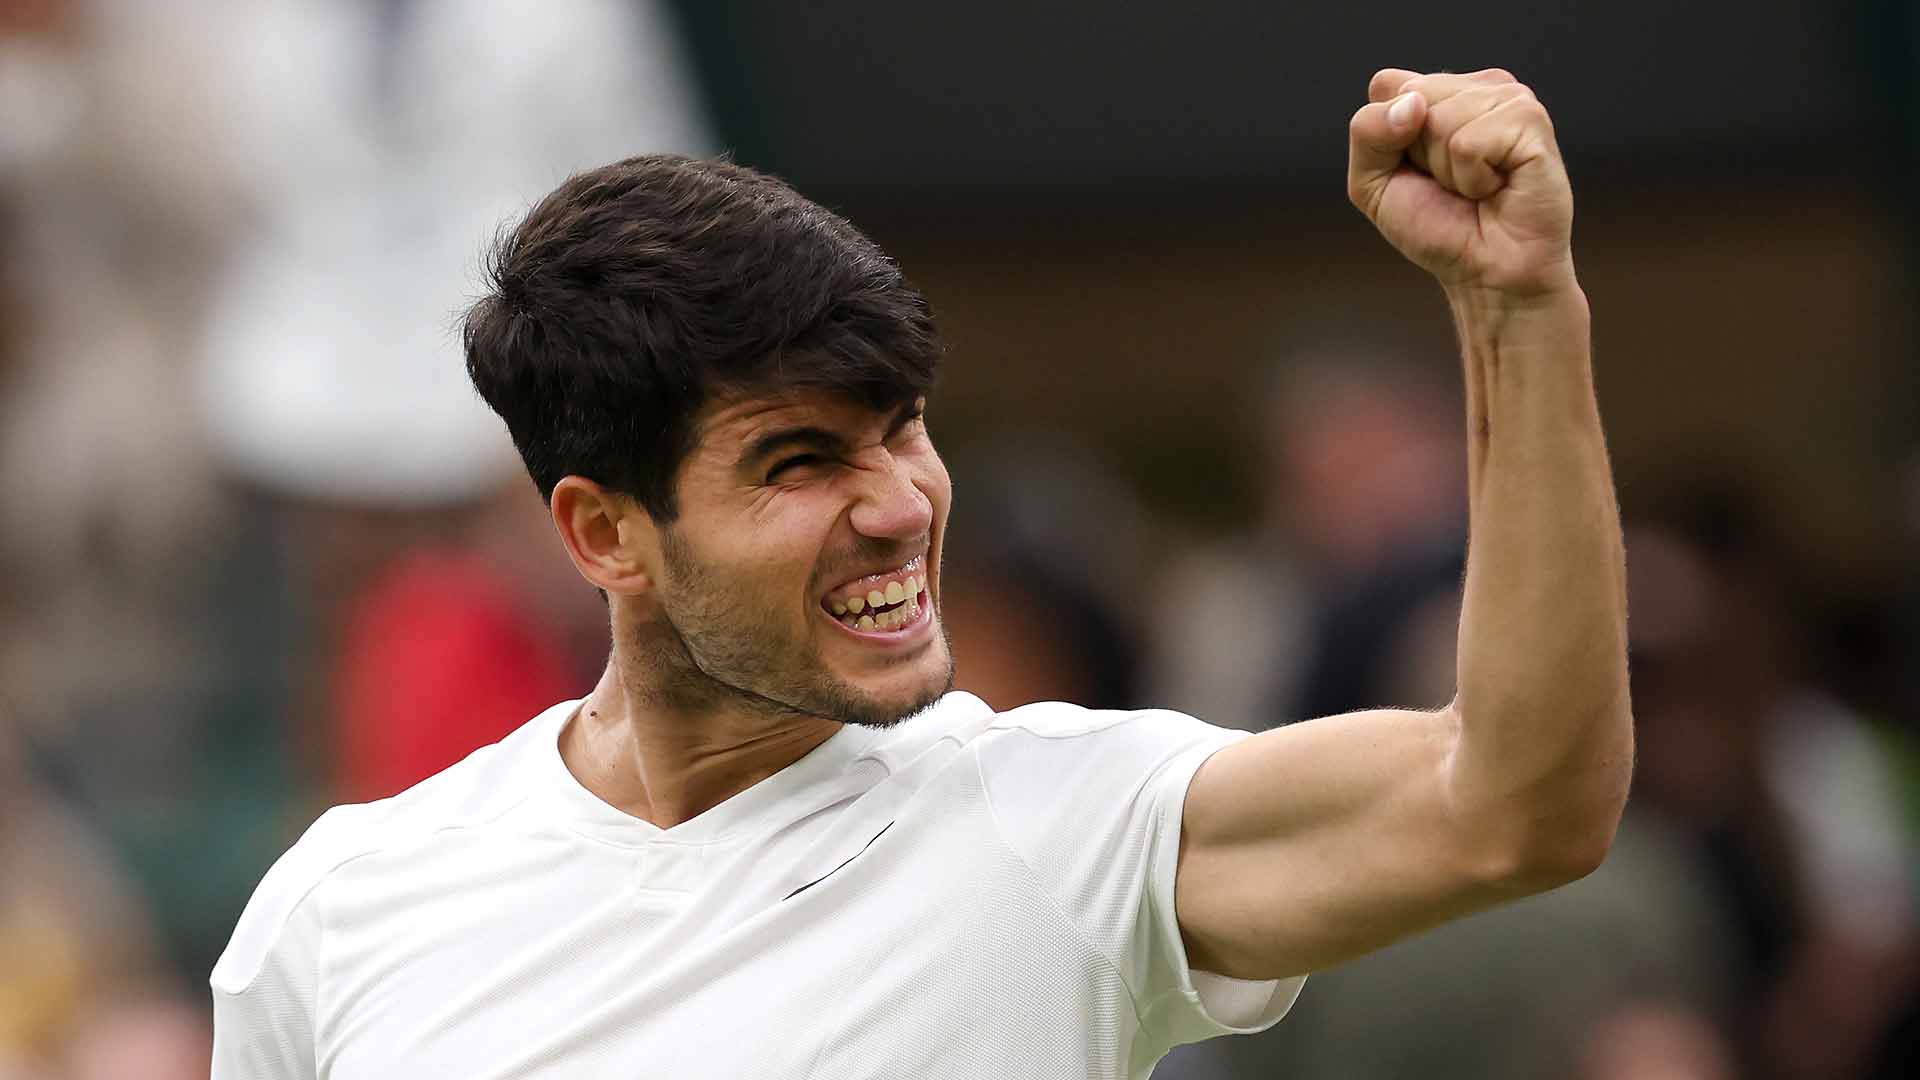 Carlos Alcaraz is two wins away from successfully defending his Wimbledon title.